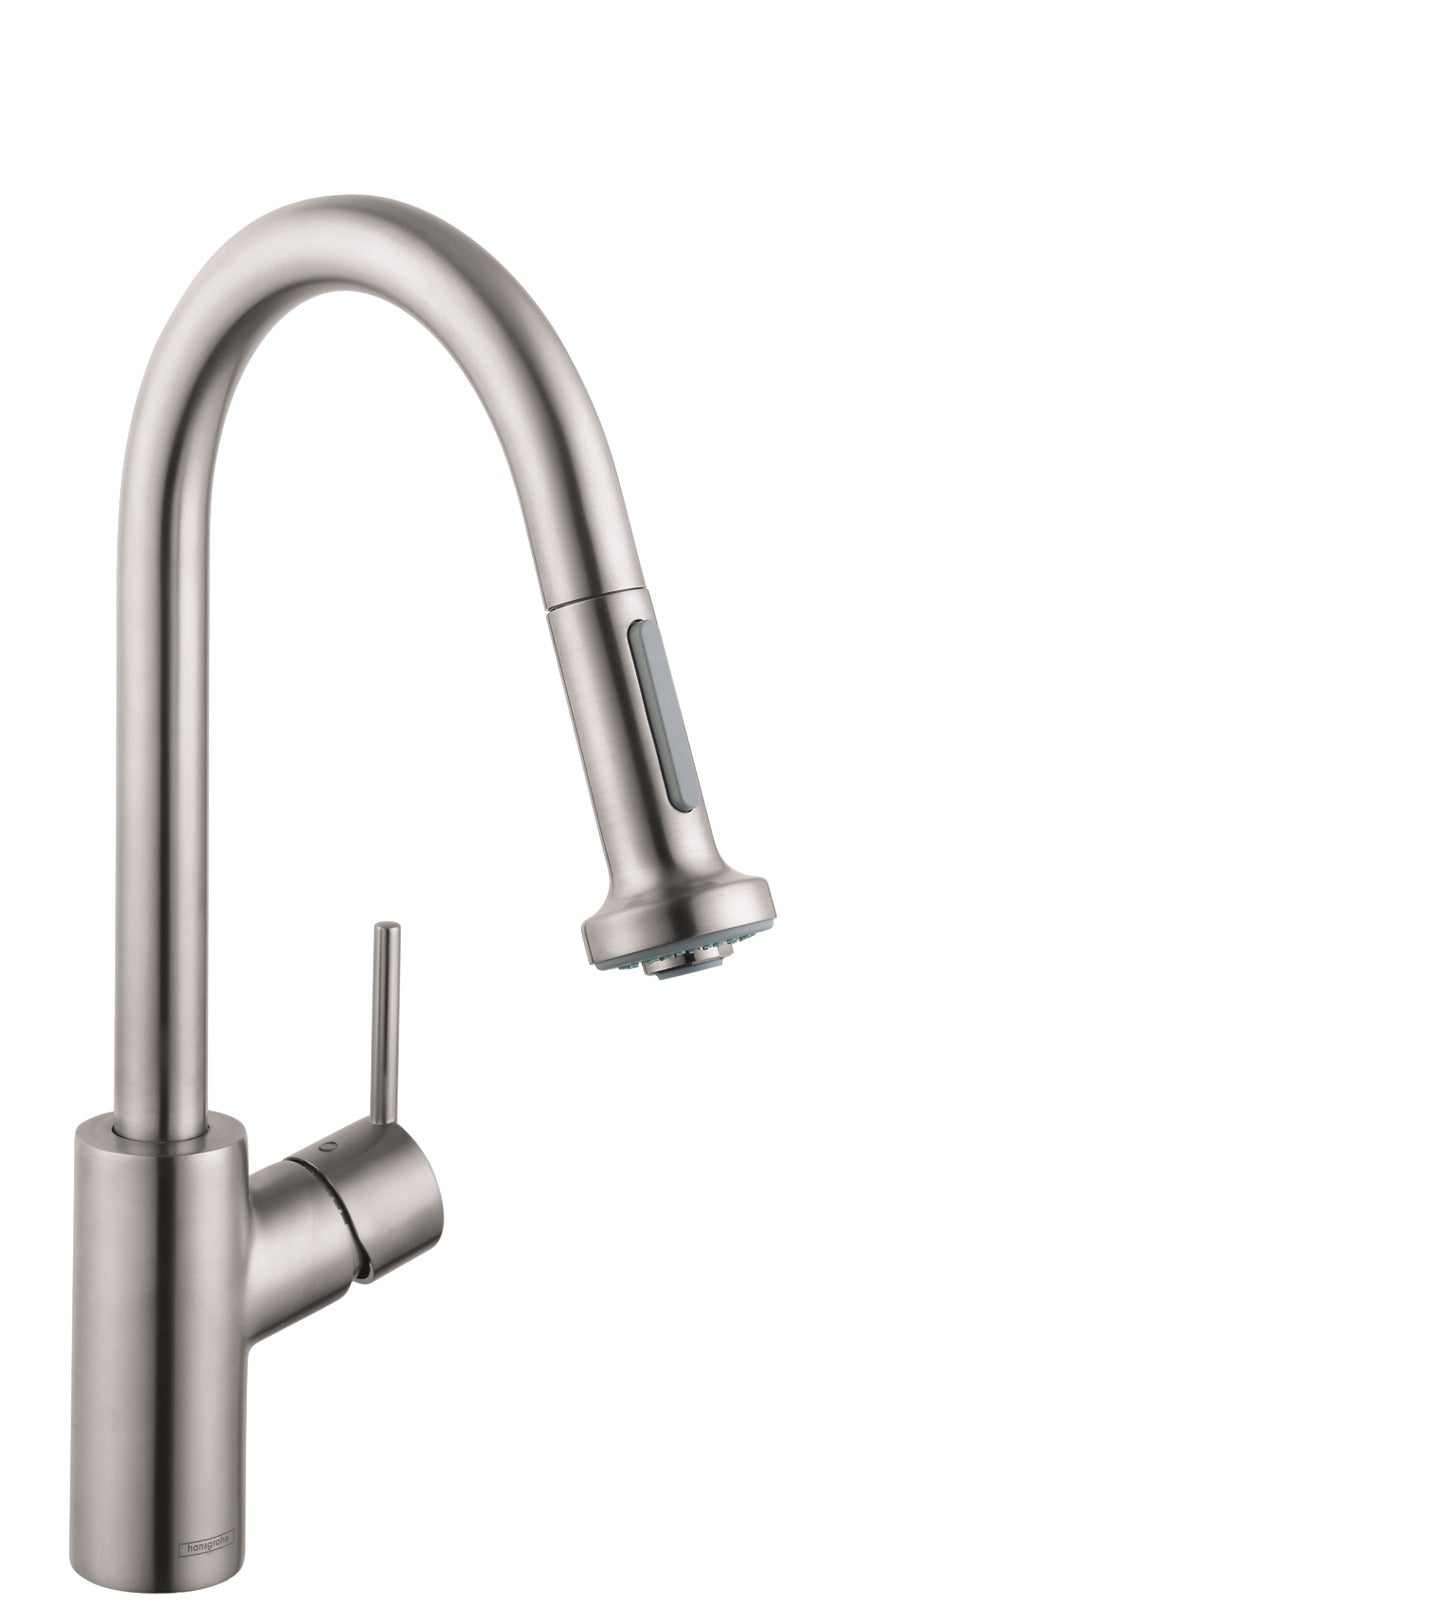 HANSGROHE 14877801 Stainless Steel Optic Talis S² Modern Kitchen Faucet 1.75 GPM